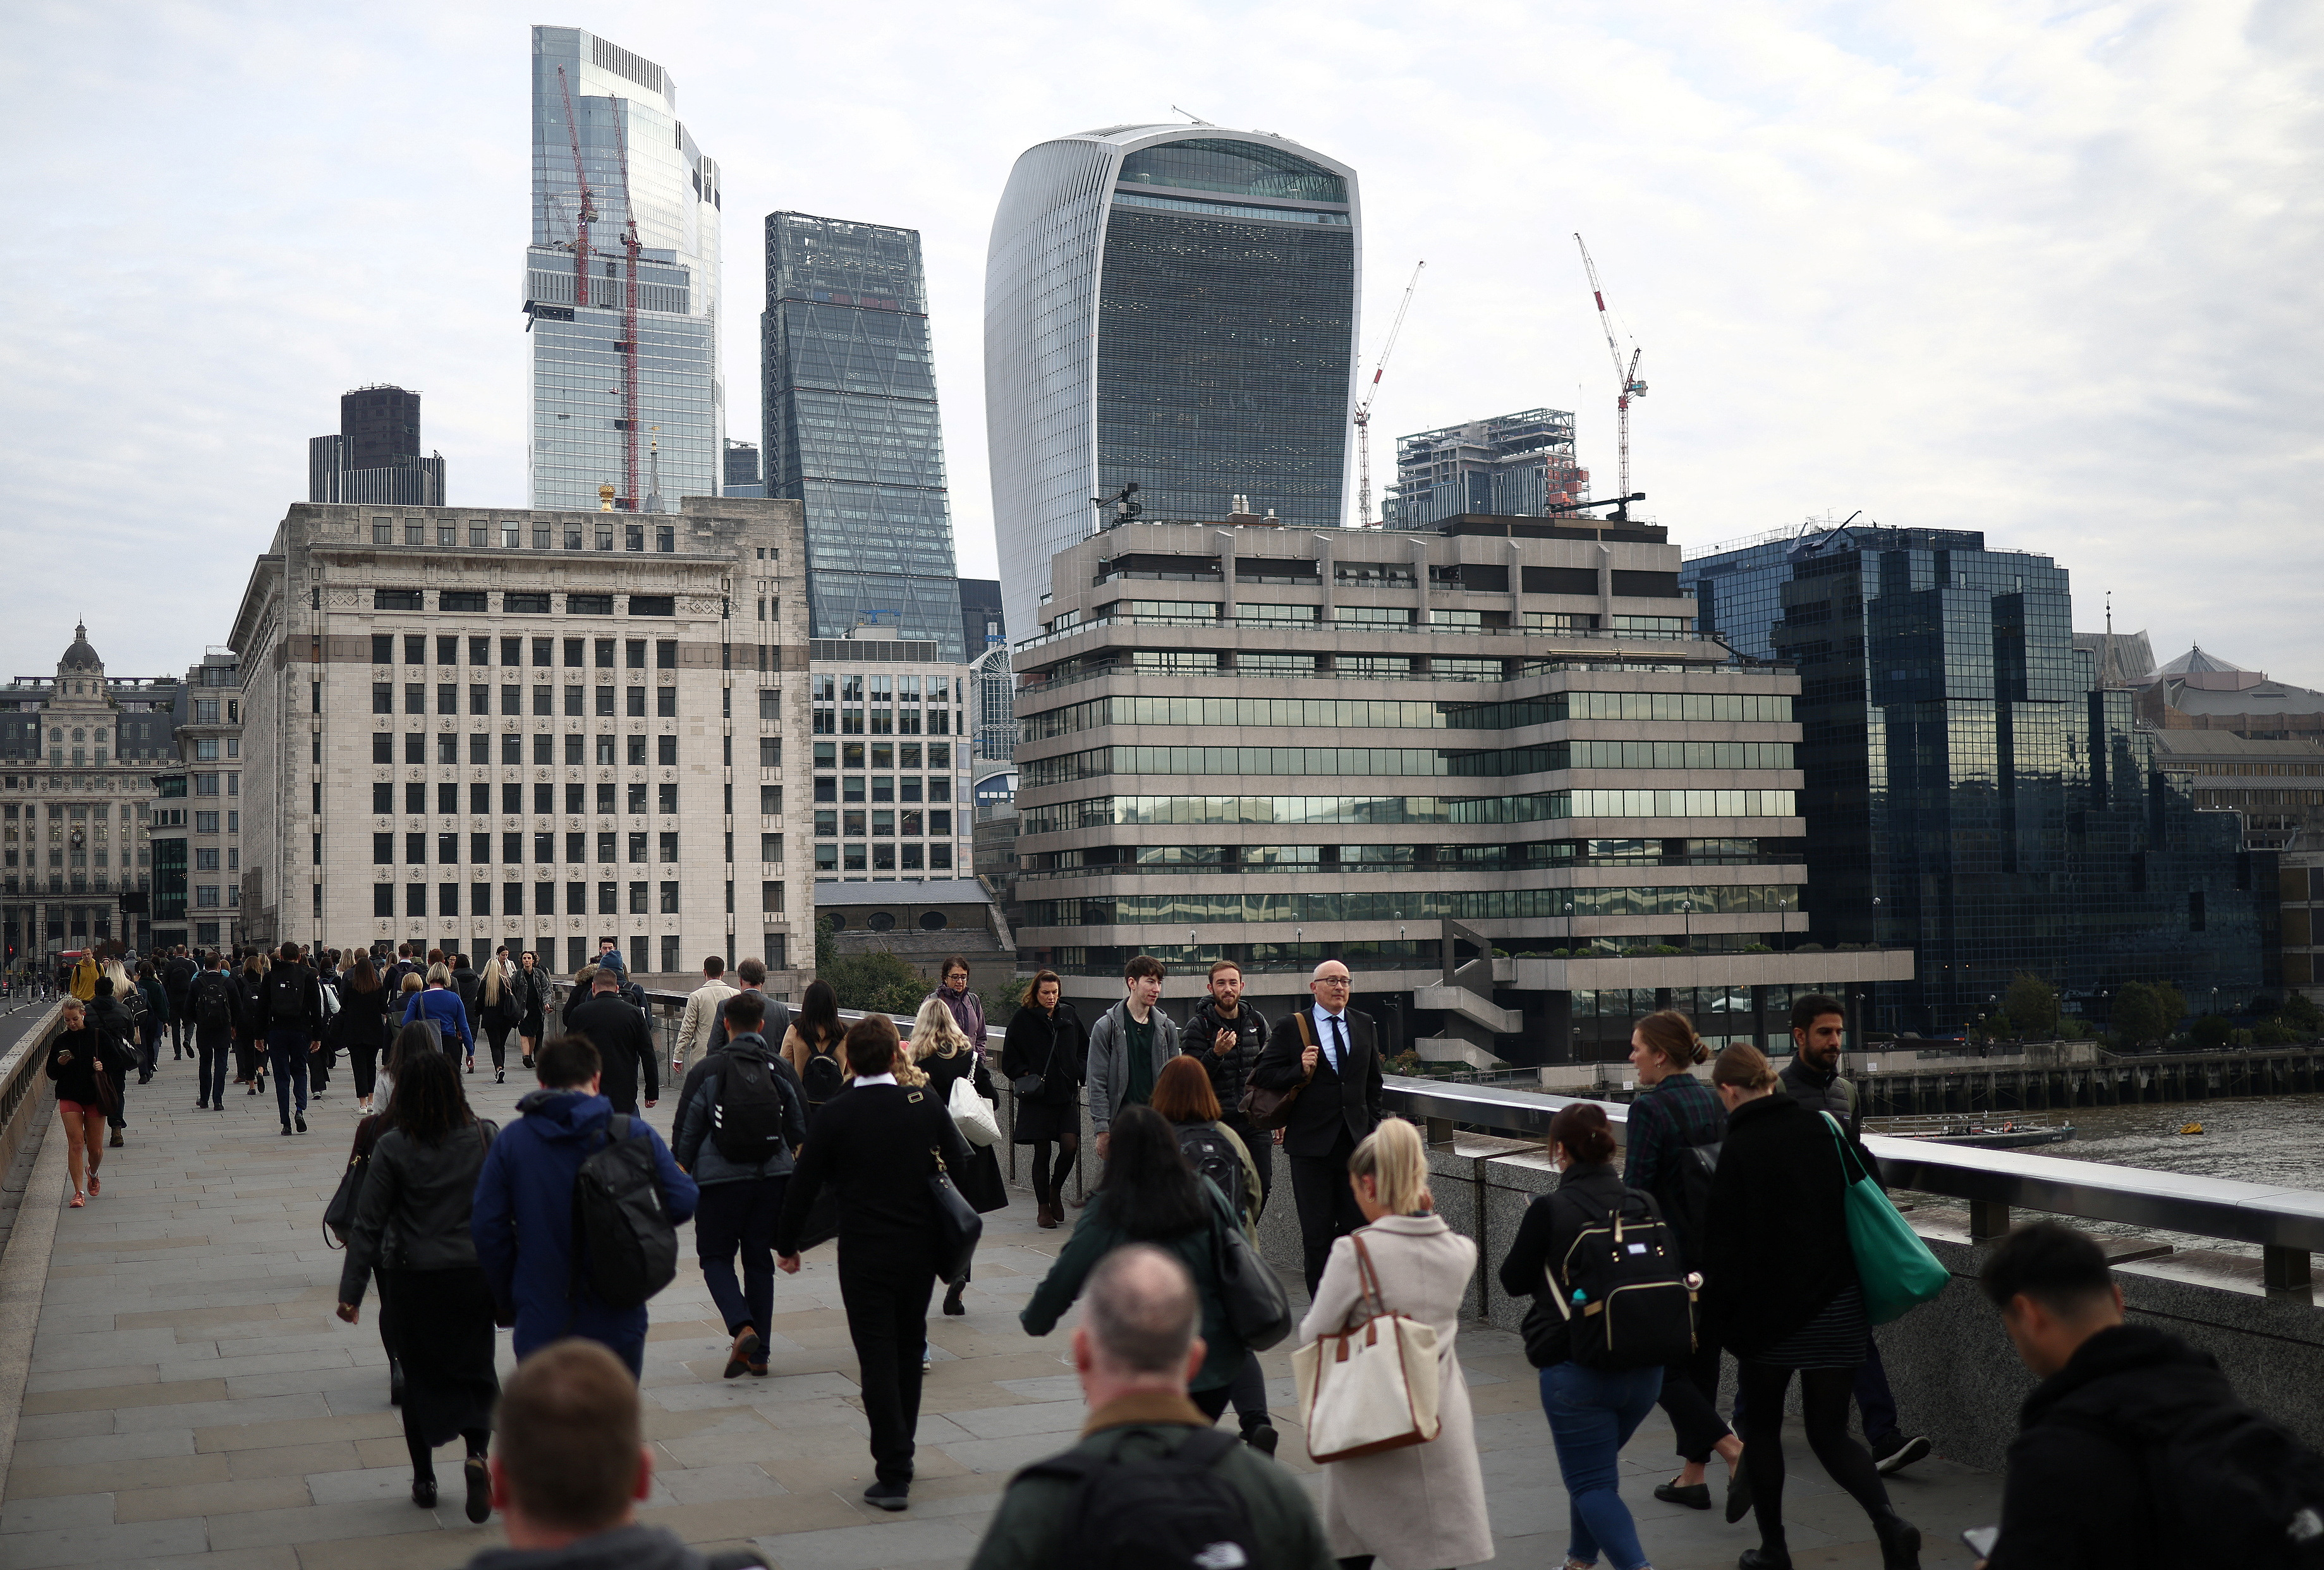 People walk over London Bridge towards the City of London financial district during rush hour in London